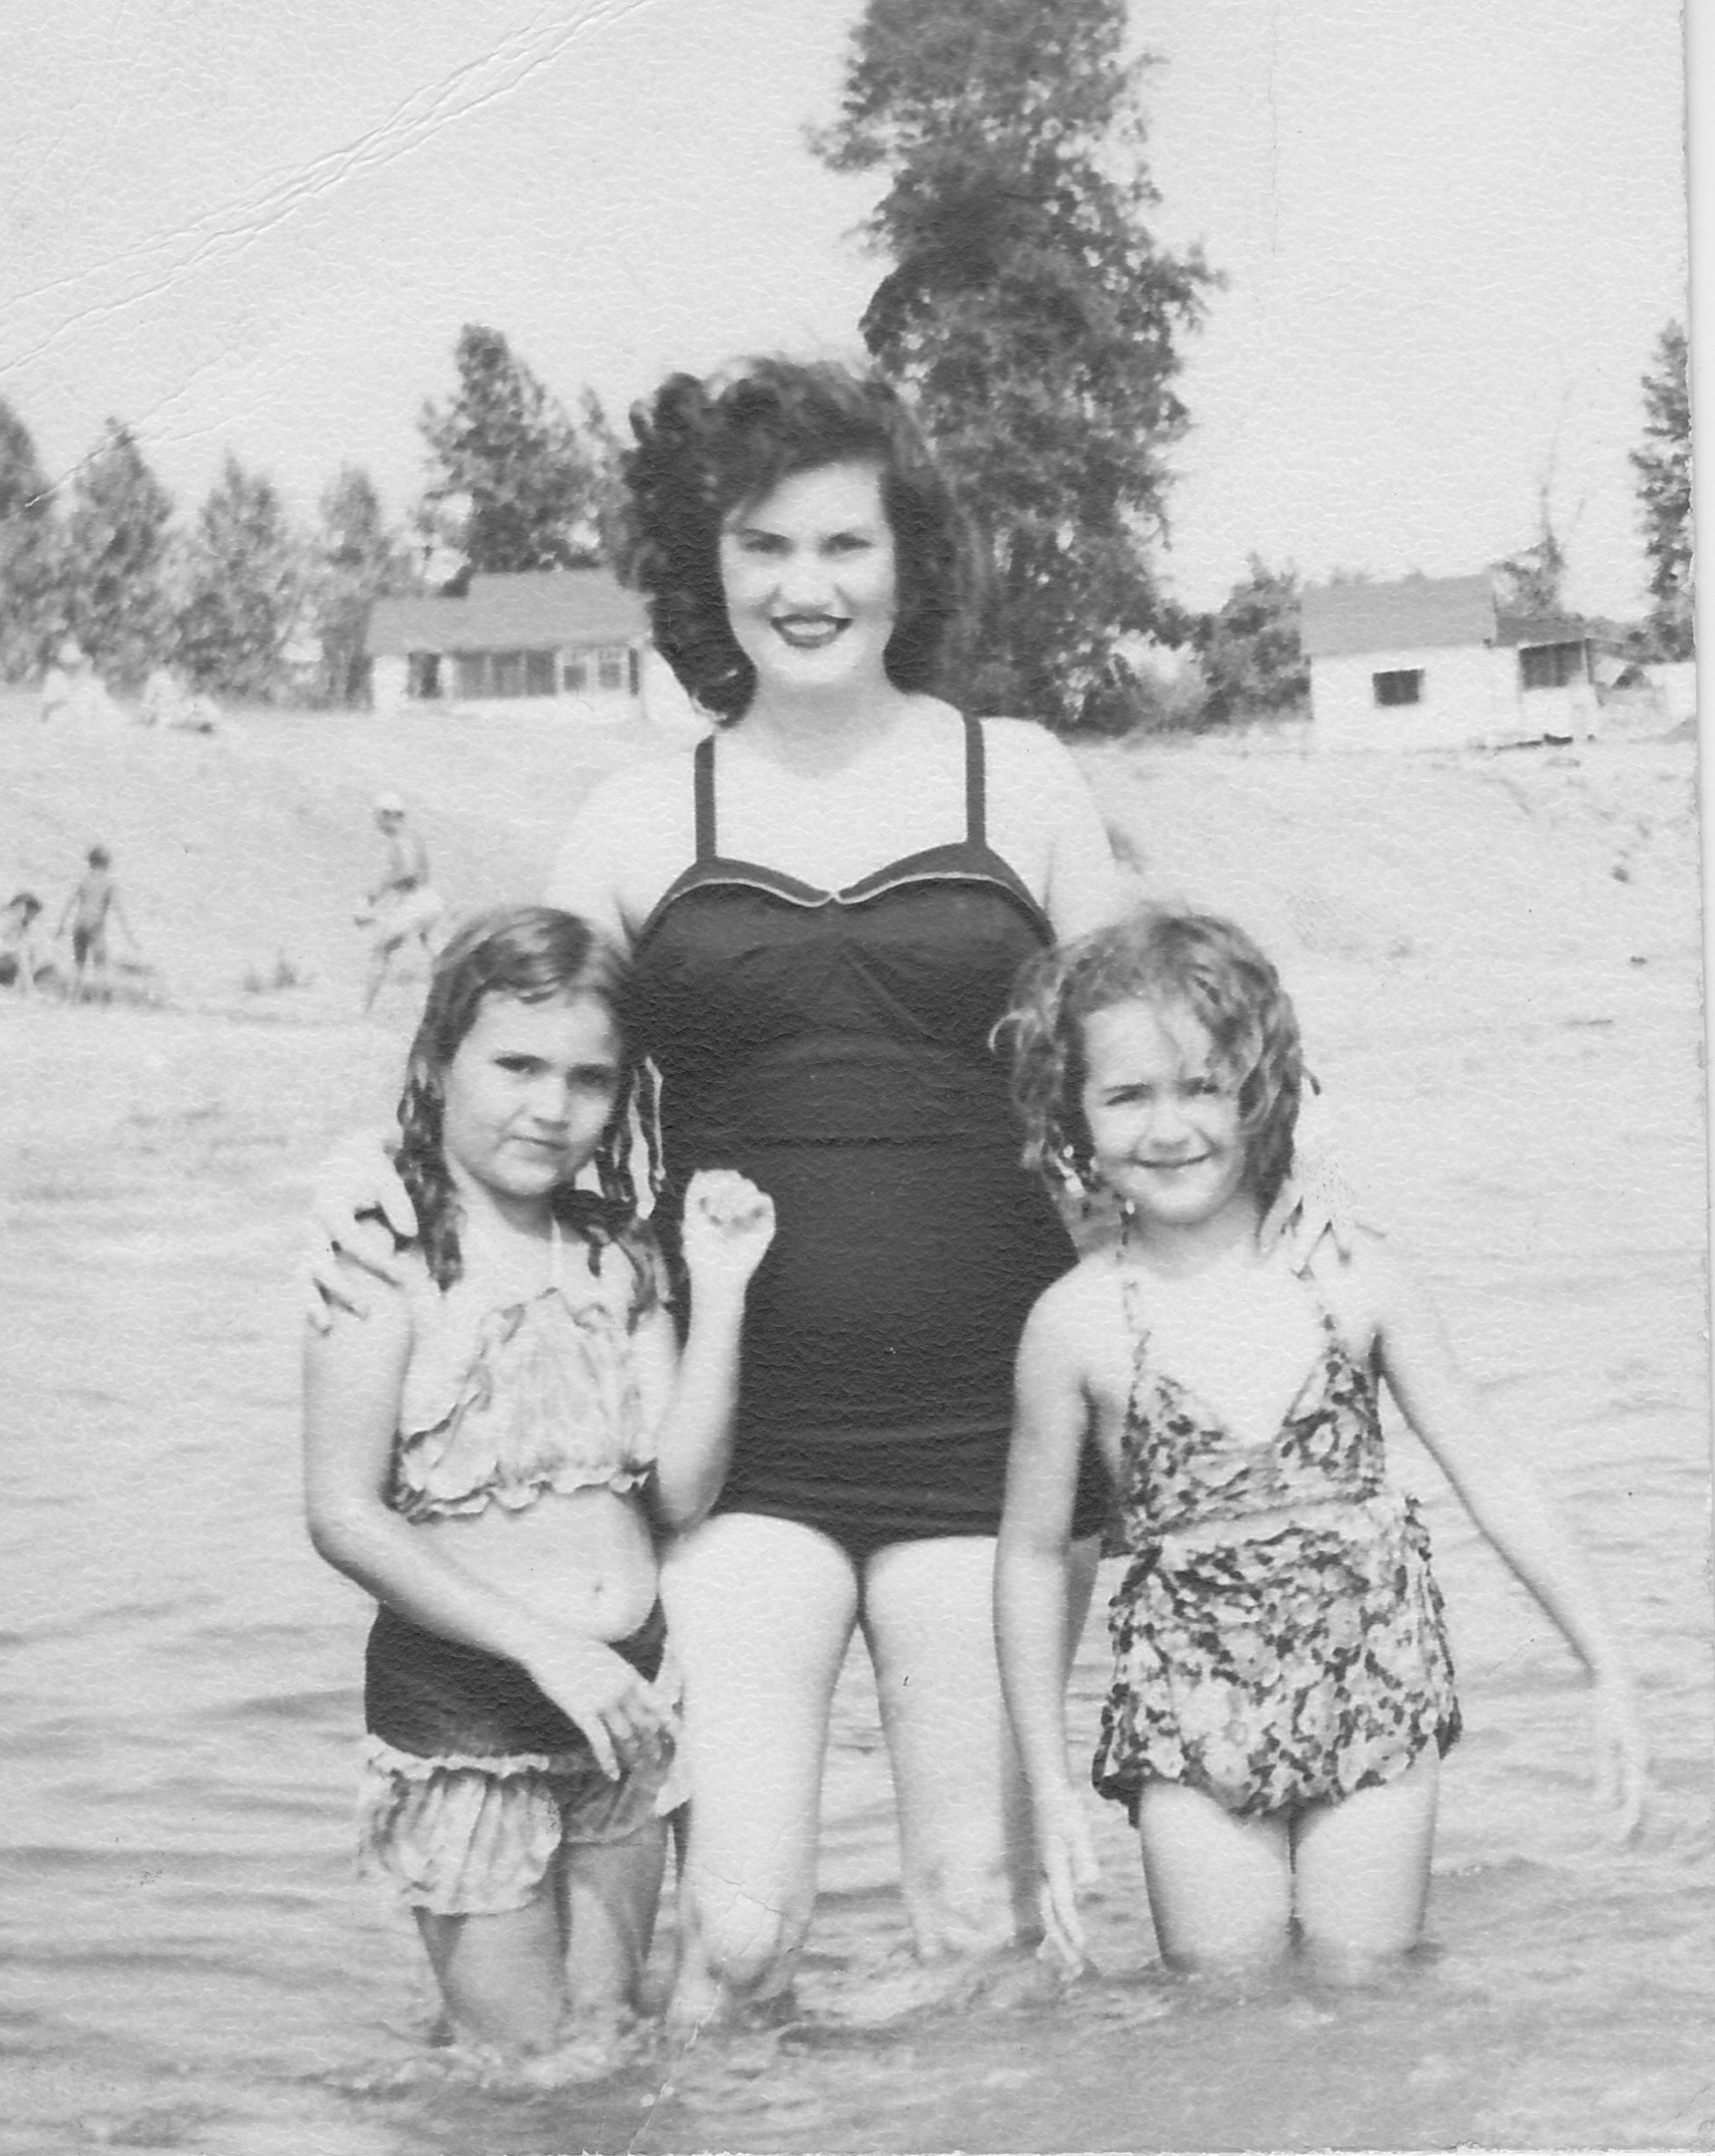 Gram with my mom at left. She's probably worried her thighs are too big.